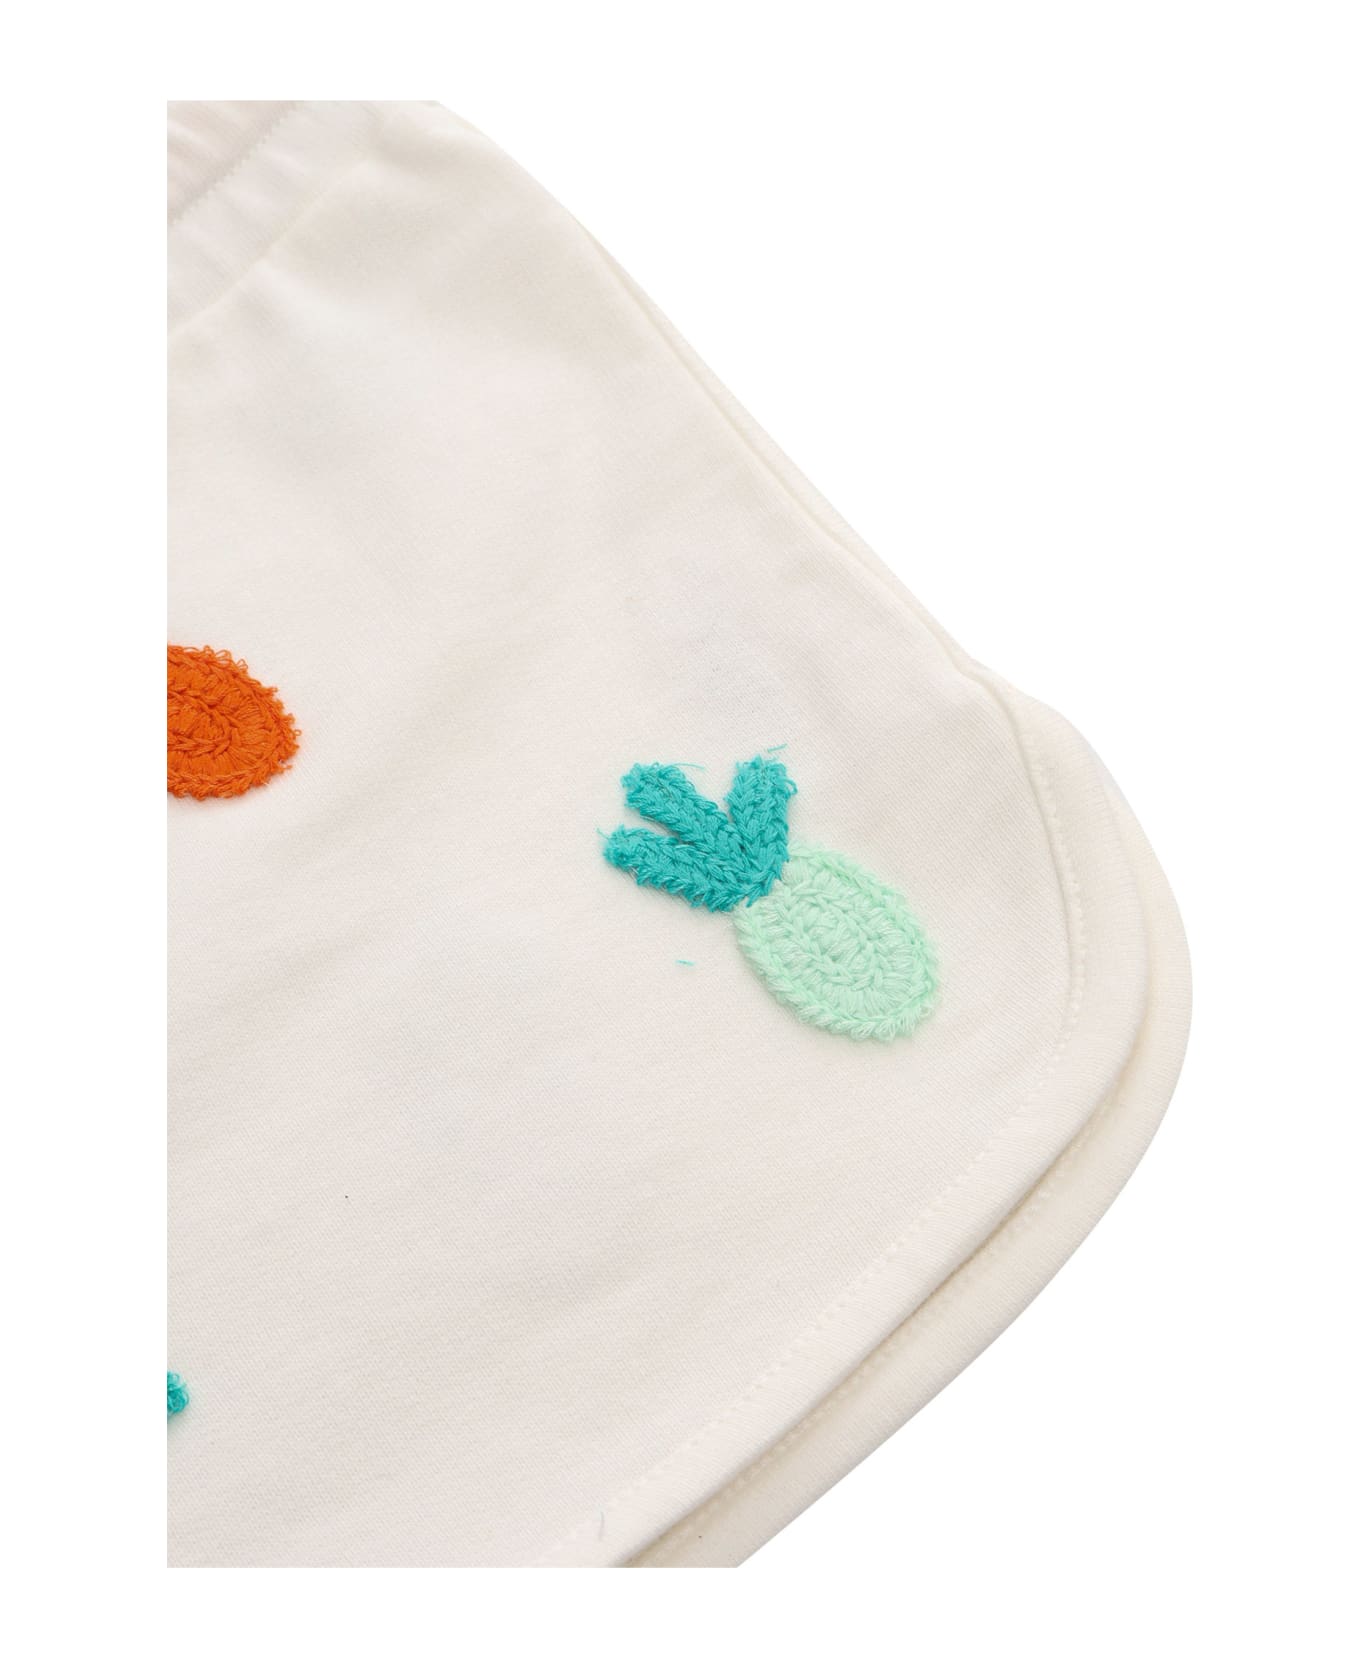 Stella McCartney Kids White Shorts With Embroidery - WHITE